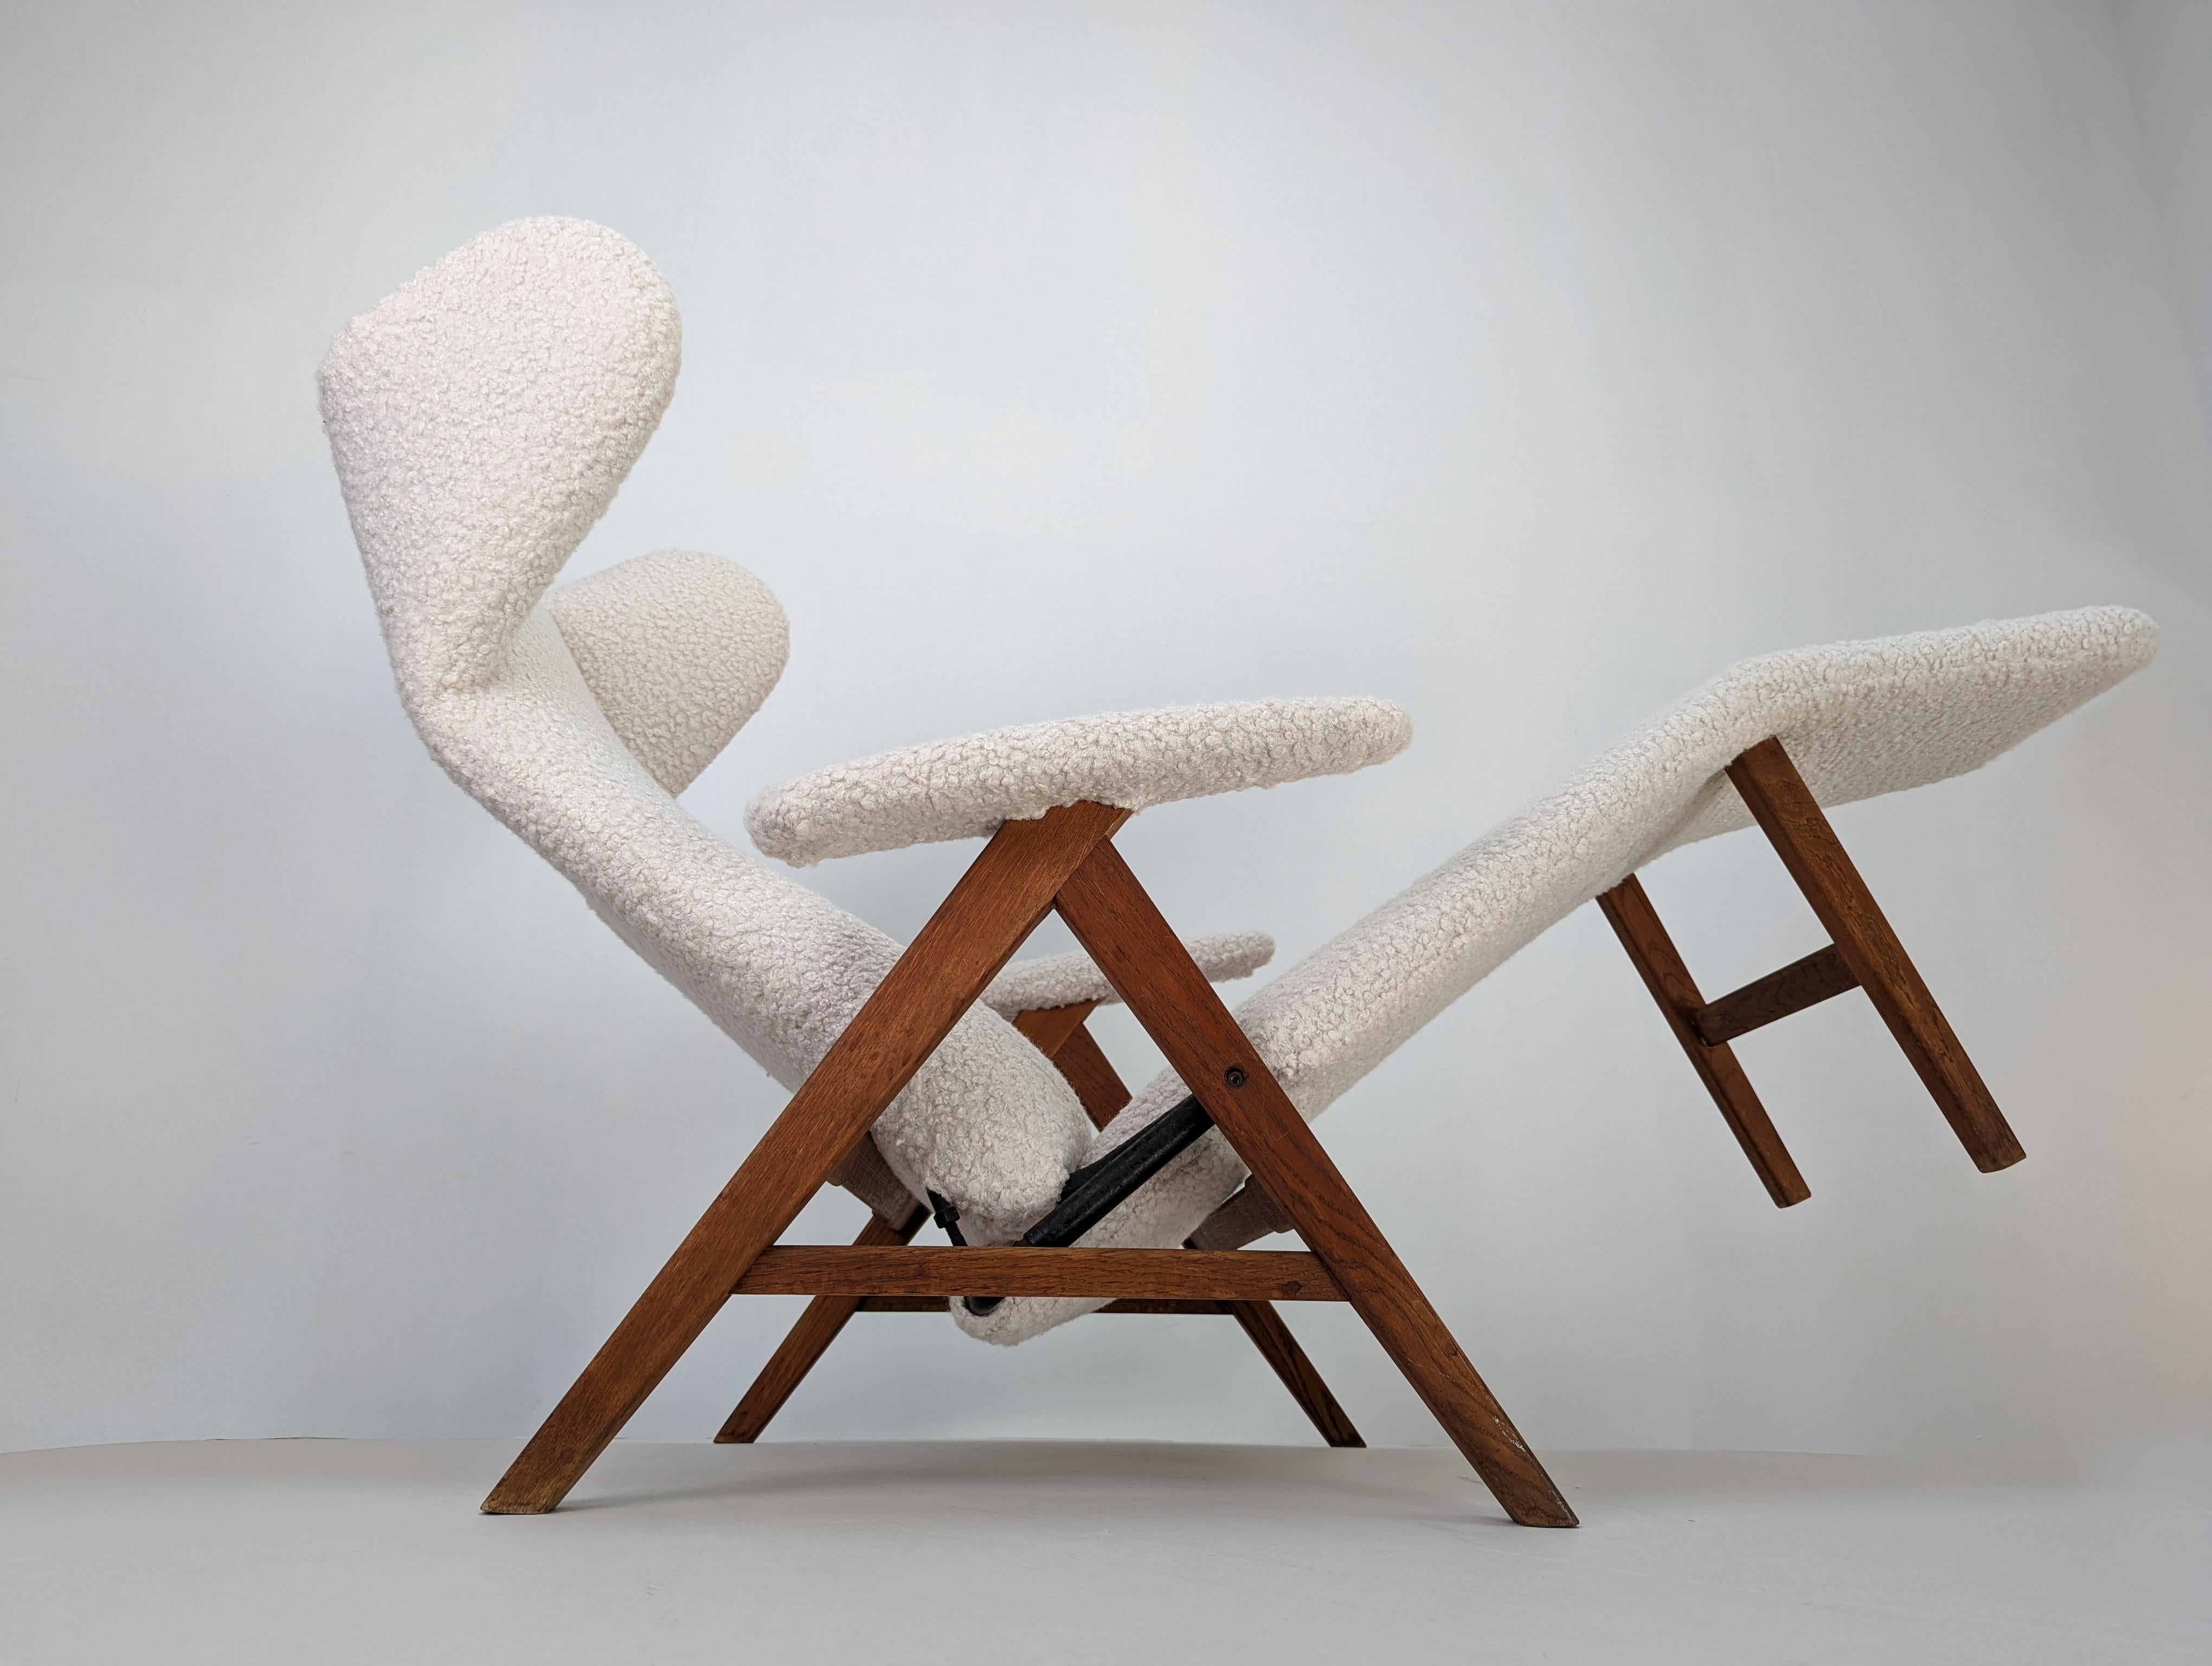 Super exclusive two position lounge chair made of teak wood and upholstered in white boucle by Norwegian designer Henry Walter Klein for the prestigious Danish furniture publisher Bramin-mobler based in Bramminge, Denmark. From 1955 to 1968, Bramin